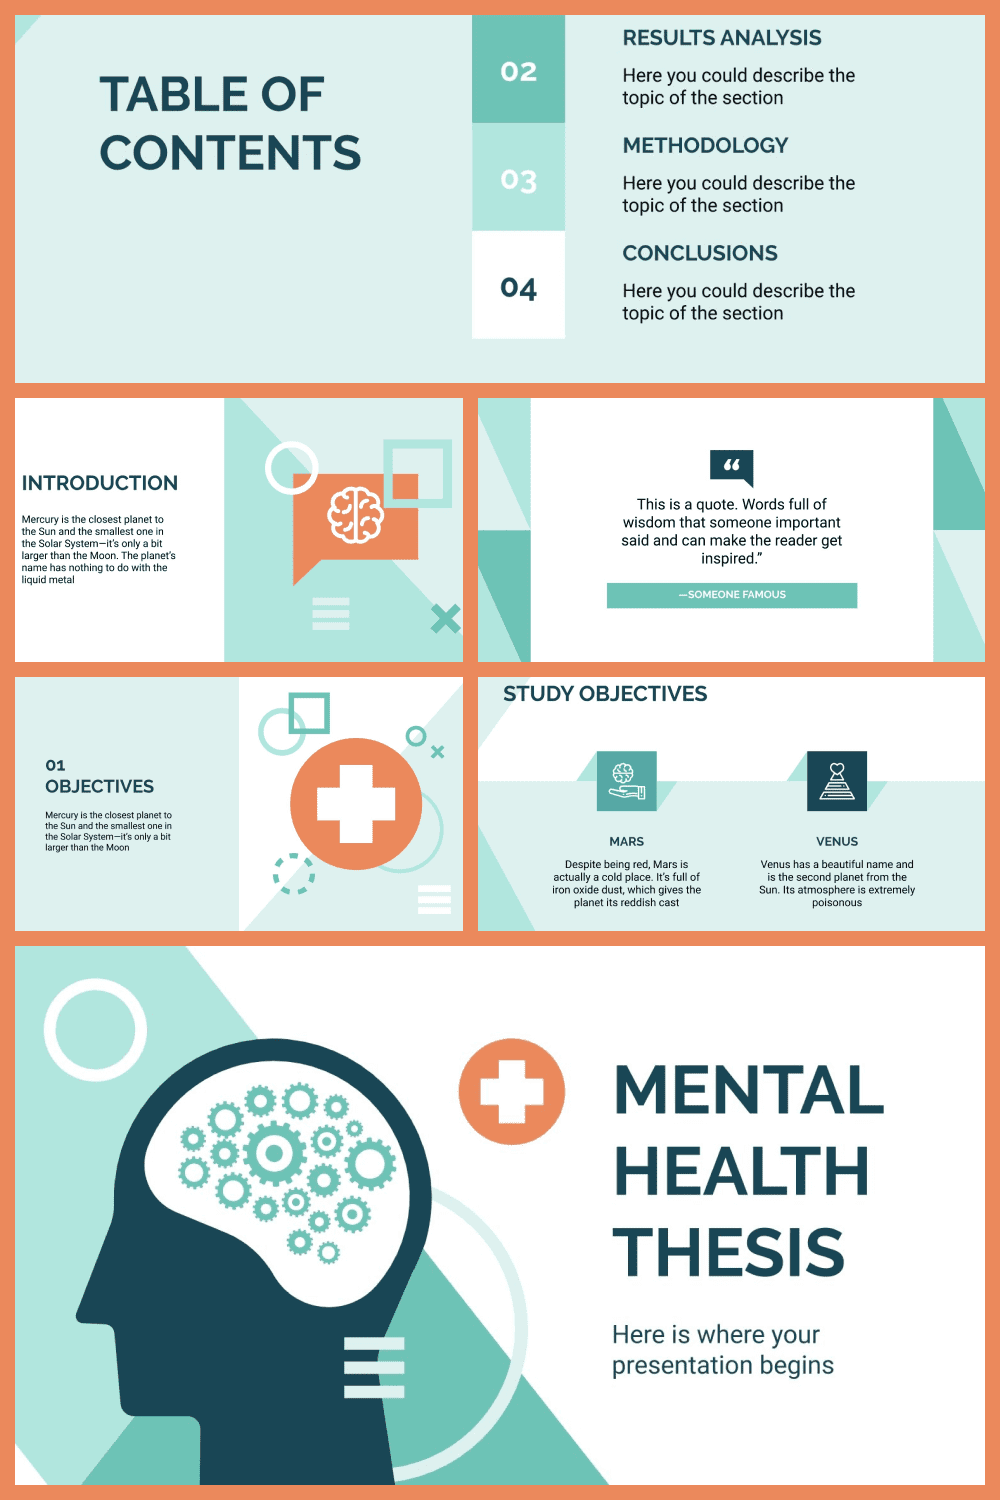 Mental health thesis template.